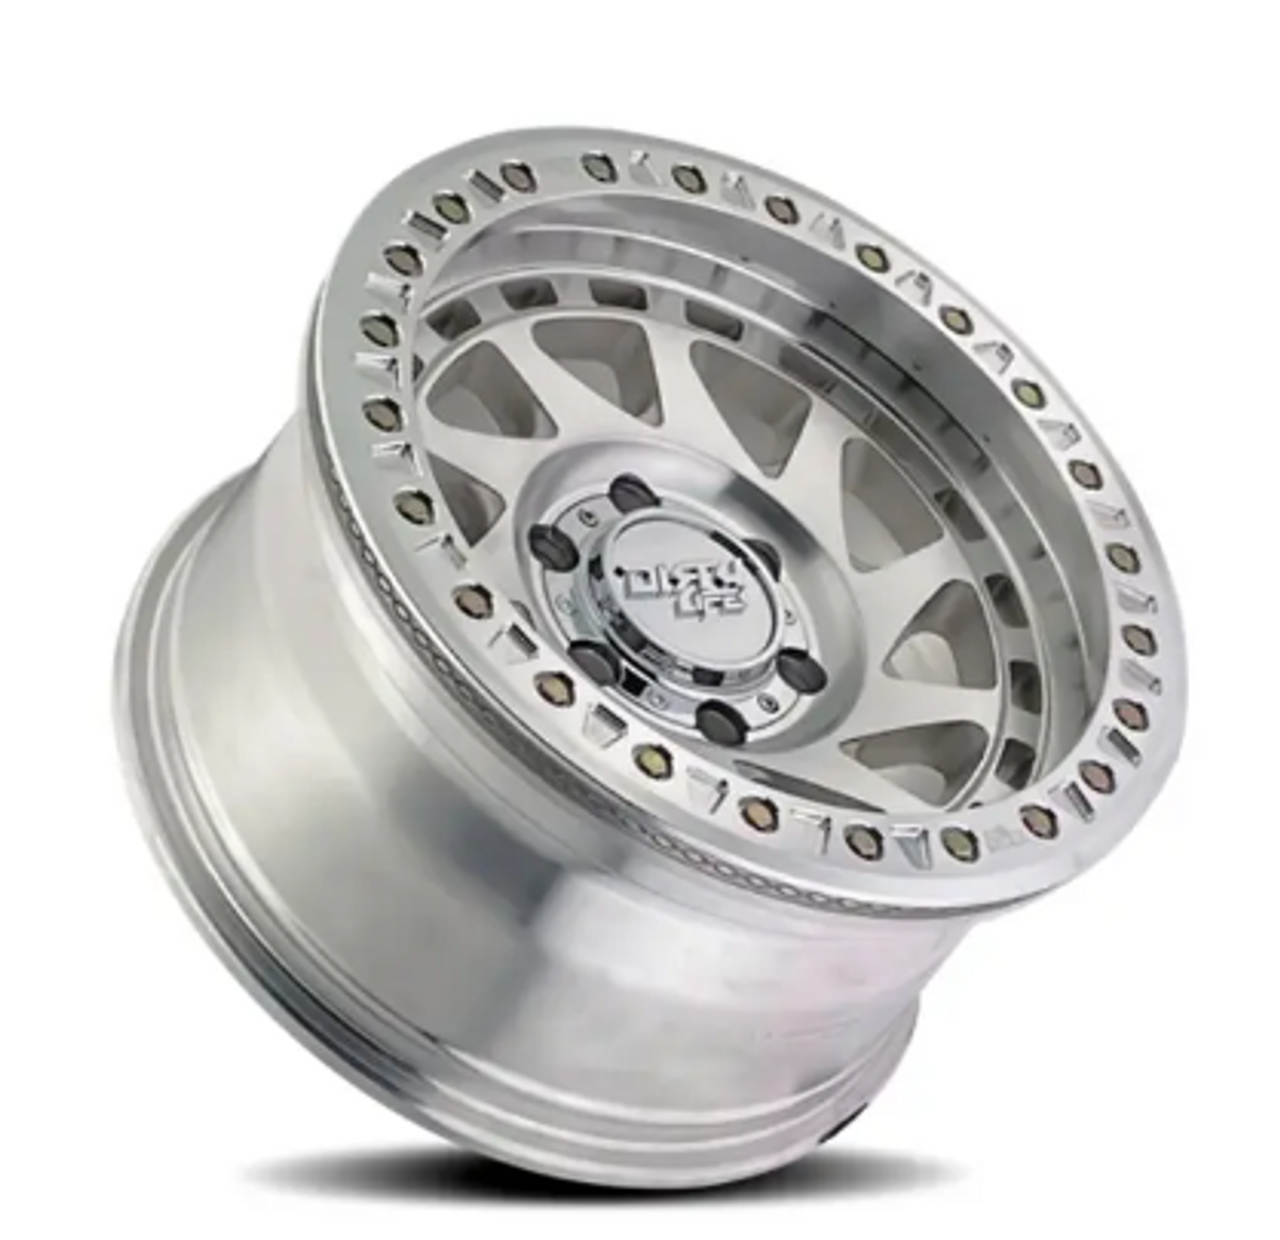 Dirty Life 9313-7973M12 9313 Enigma Race Beadlock 17x9 5x5 -12mm in Machined